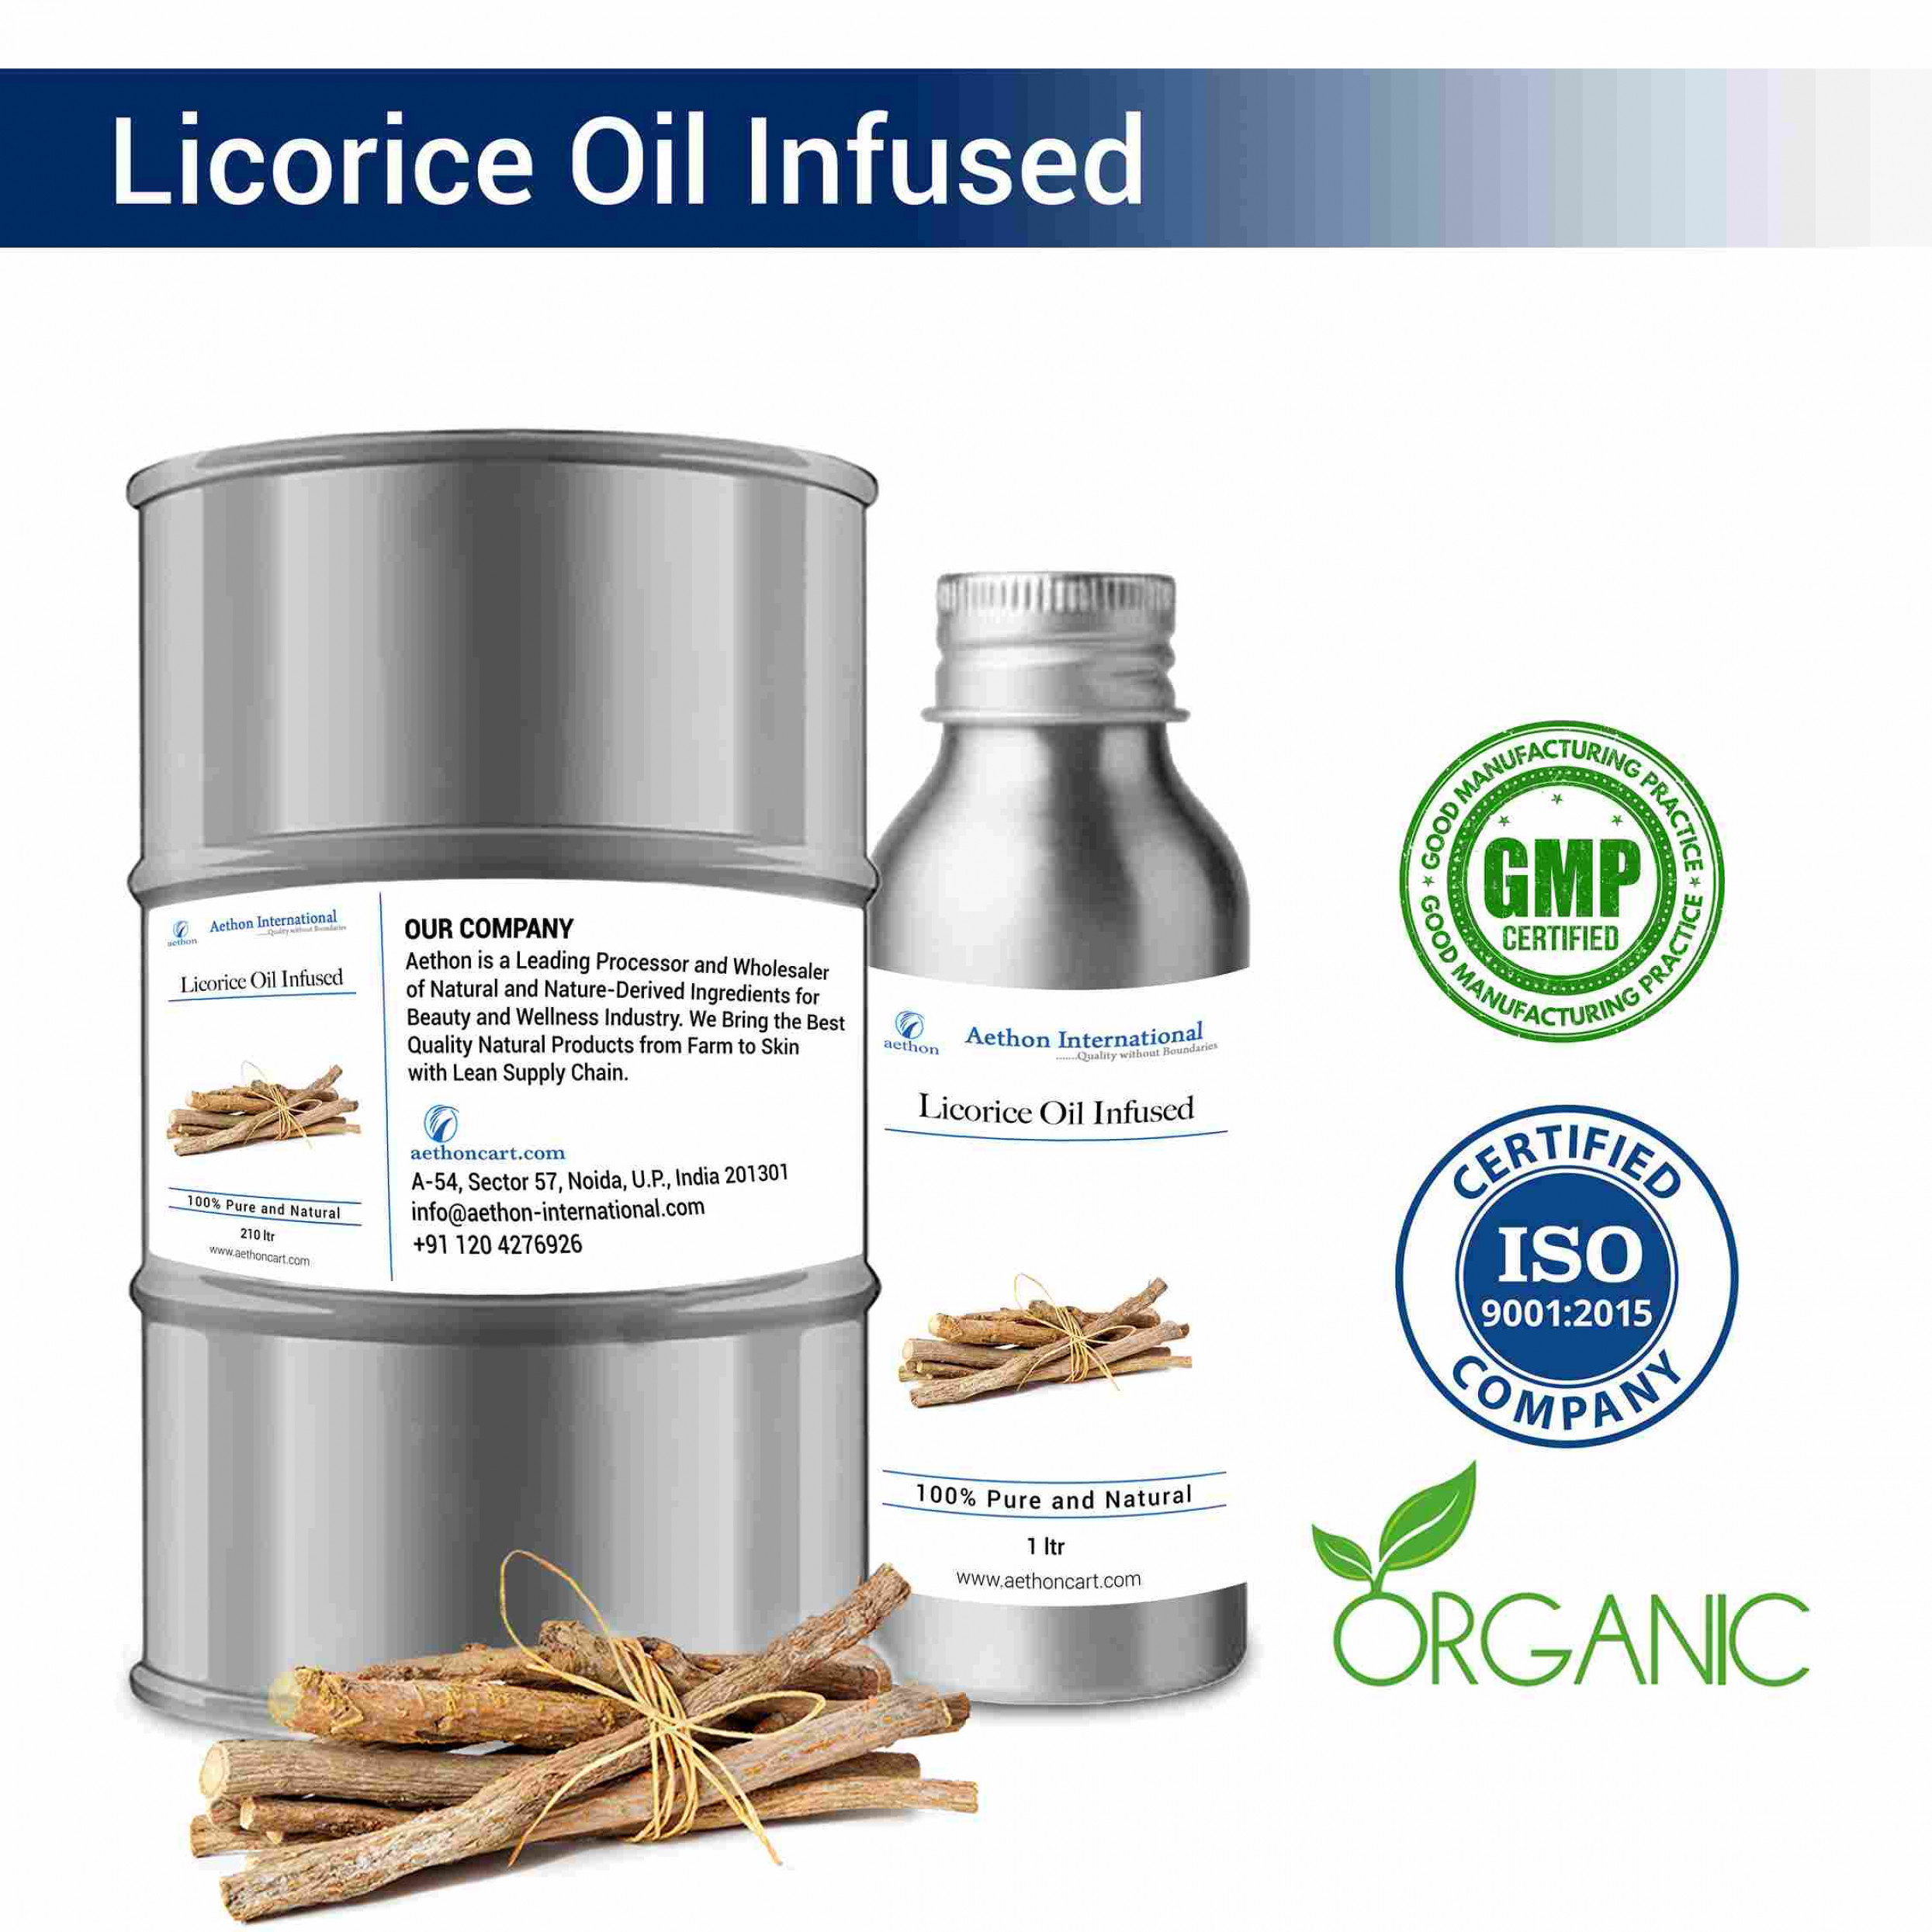 Licorice Oil Infused